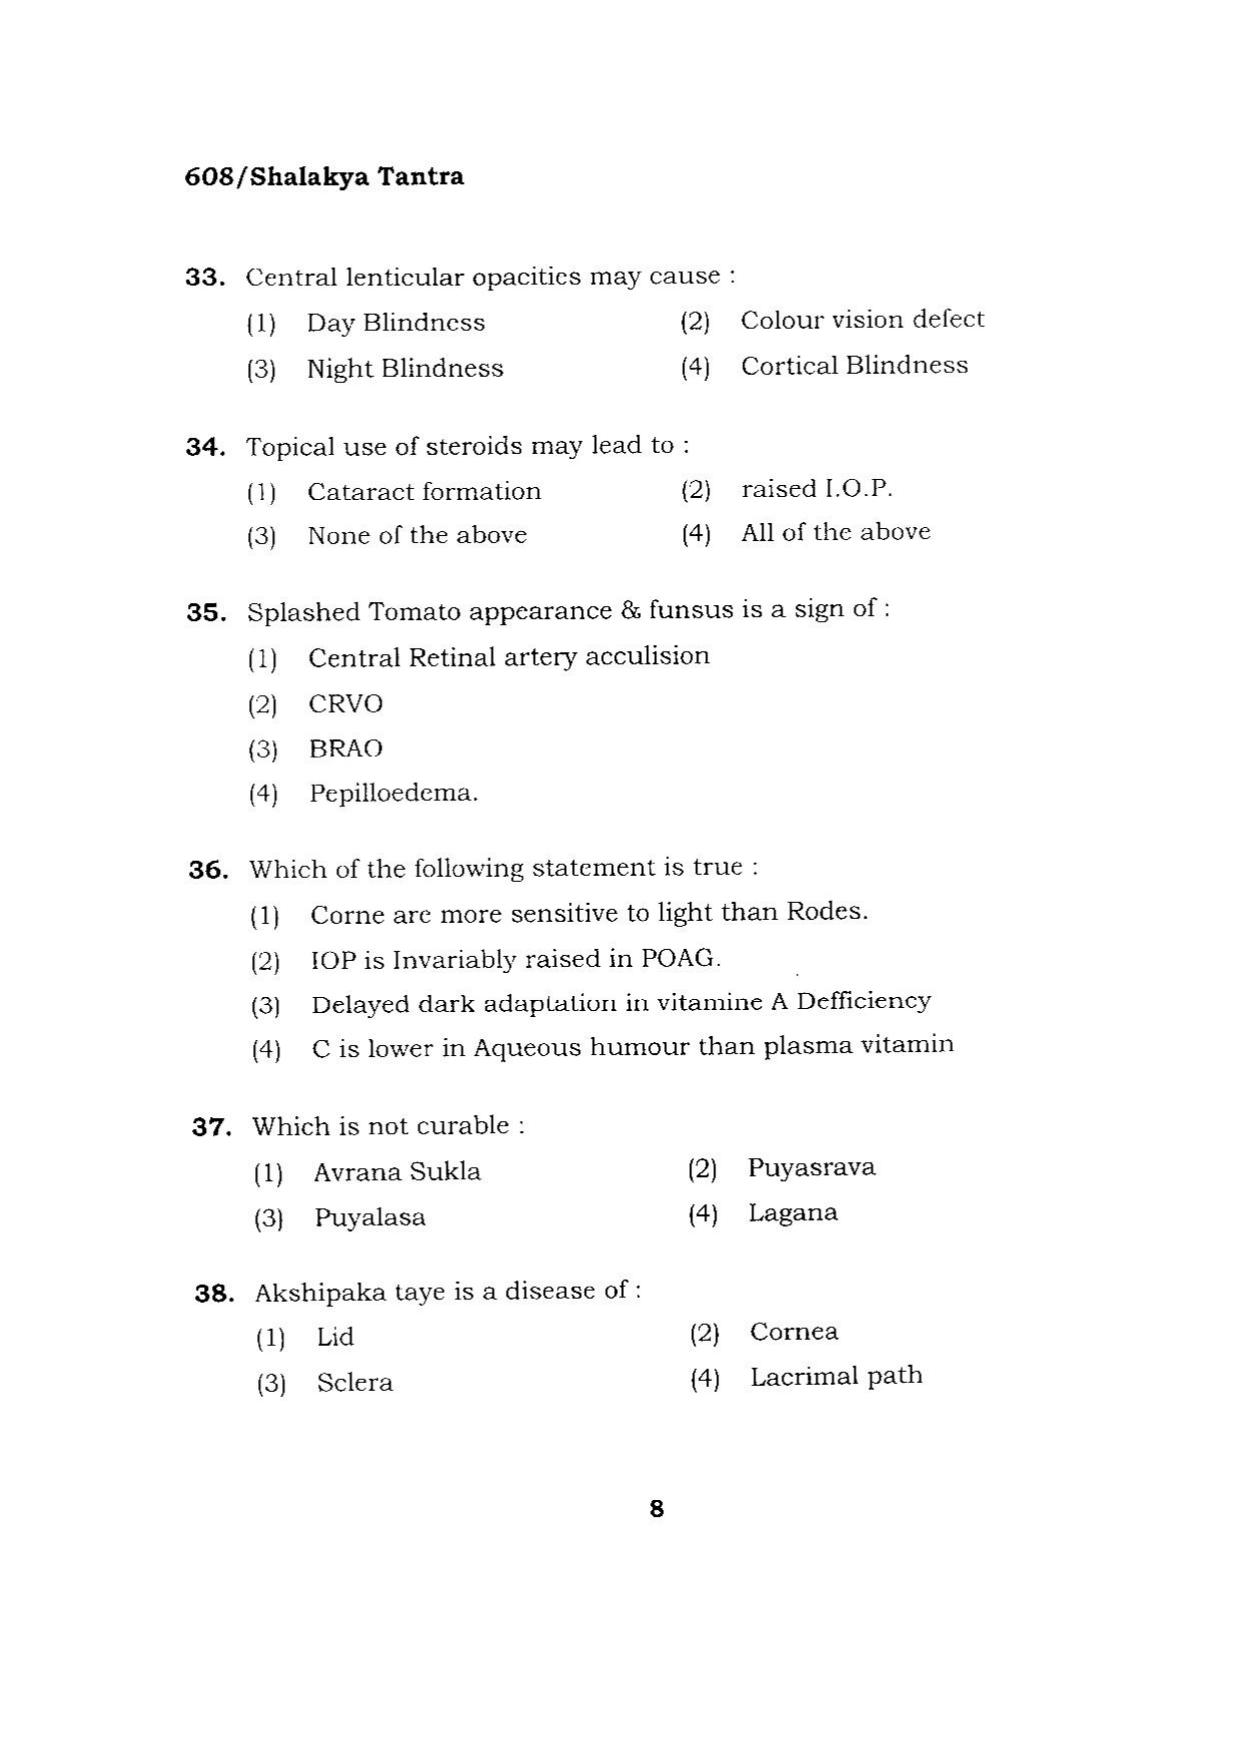 BHU RET SHALAKYA TANTRA 2015 Question Paper - Page 8